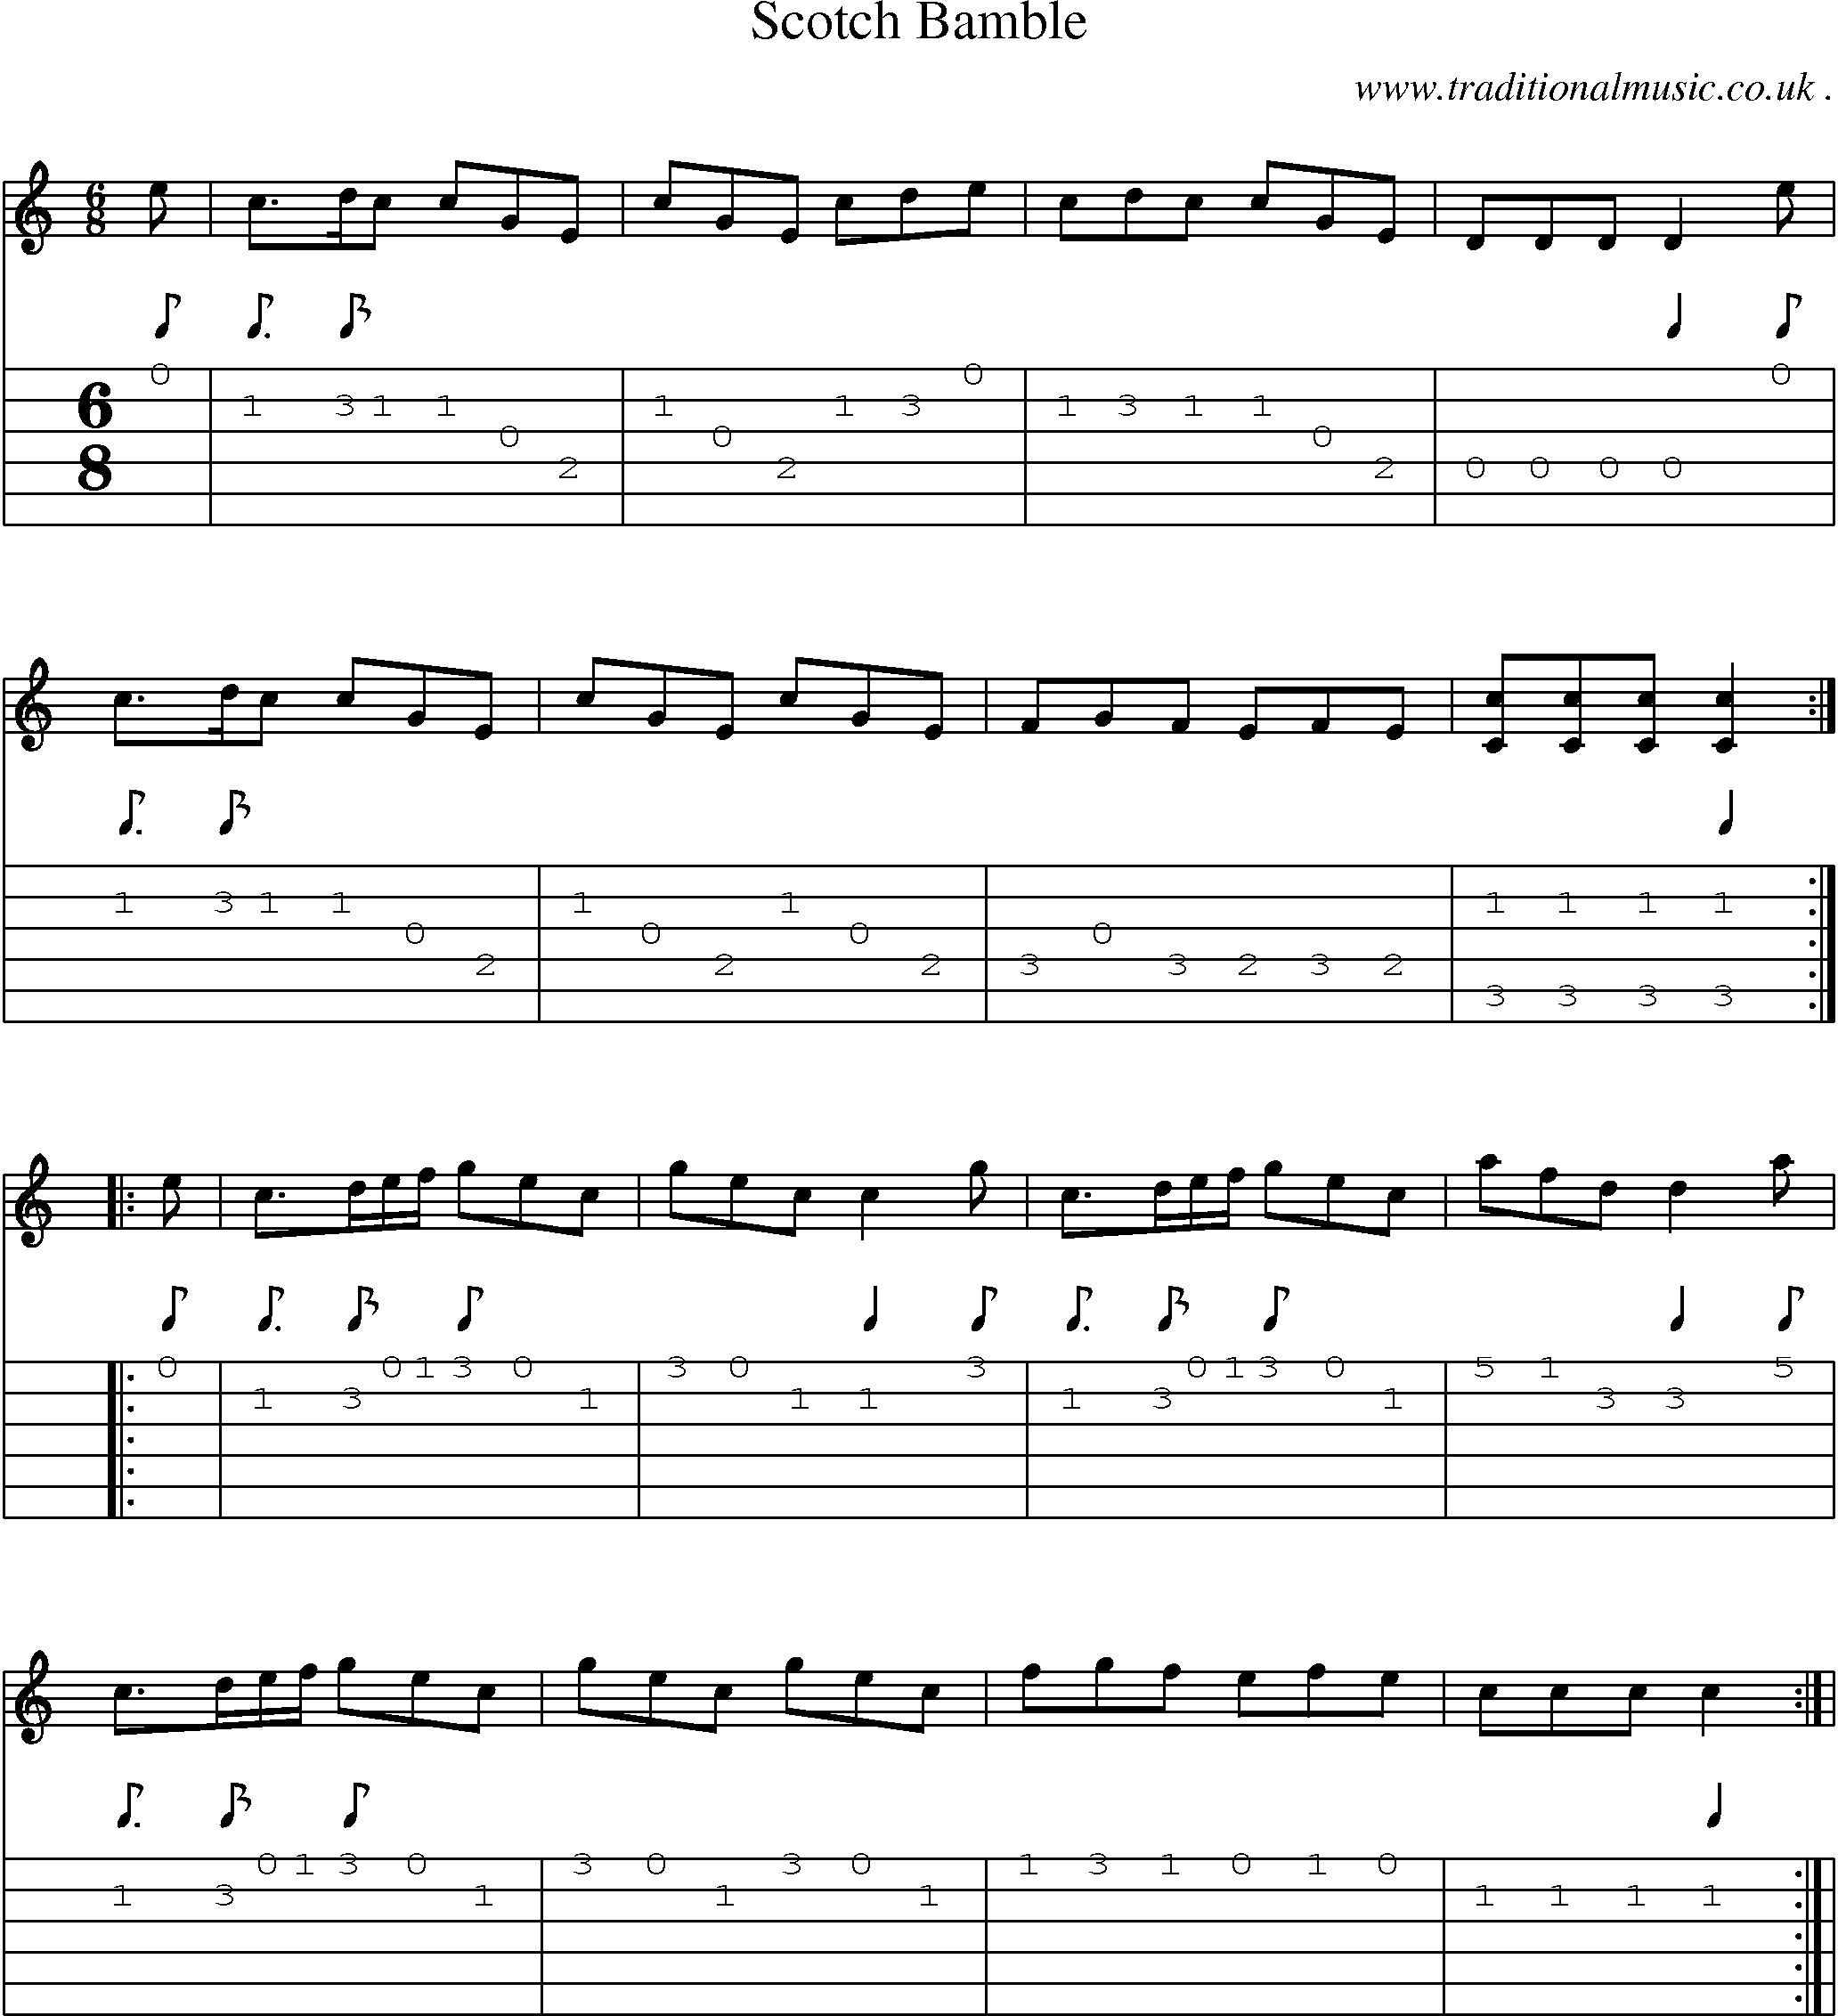 Sheet-Music and Guitar Tabs for Scotch Bamble